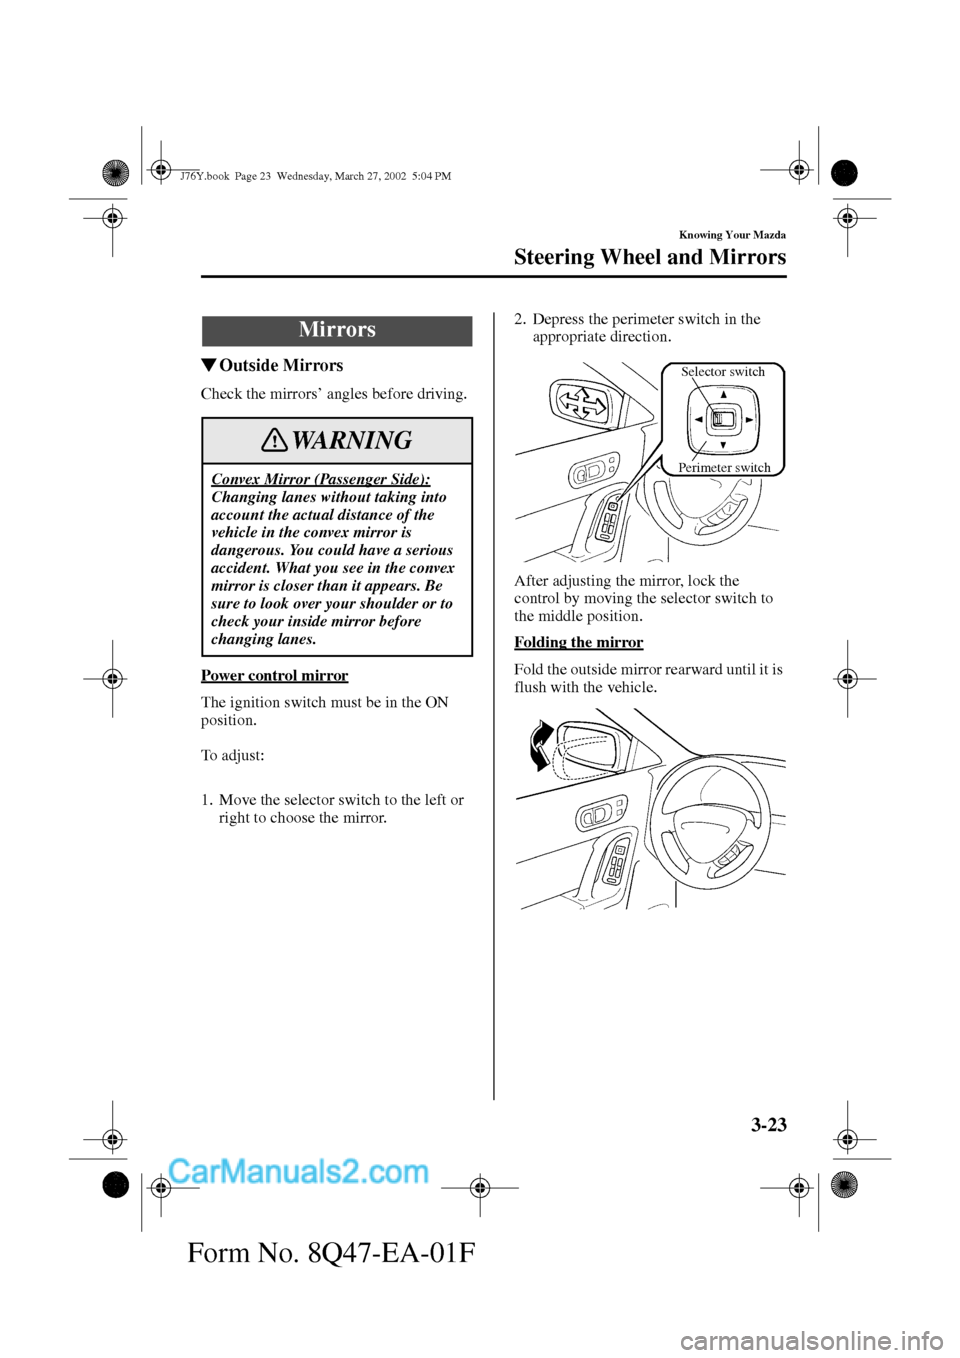 MAZDA MODEL MILLENIA 2002  Owners Manual (in English) 3-23
Knowing Your Mazda
Steering Wheel and Mirrors
Form No. 8Q47-EA-01F
Outside Mirrors
Check the mirrors’ angles before driving.
Power control mirror
The ignition switch must be in the ON 
positio